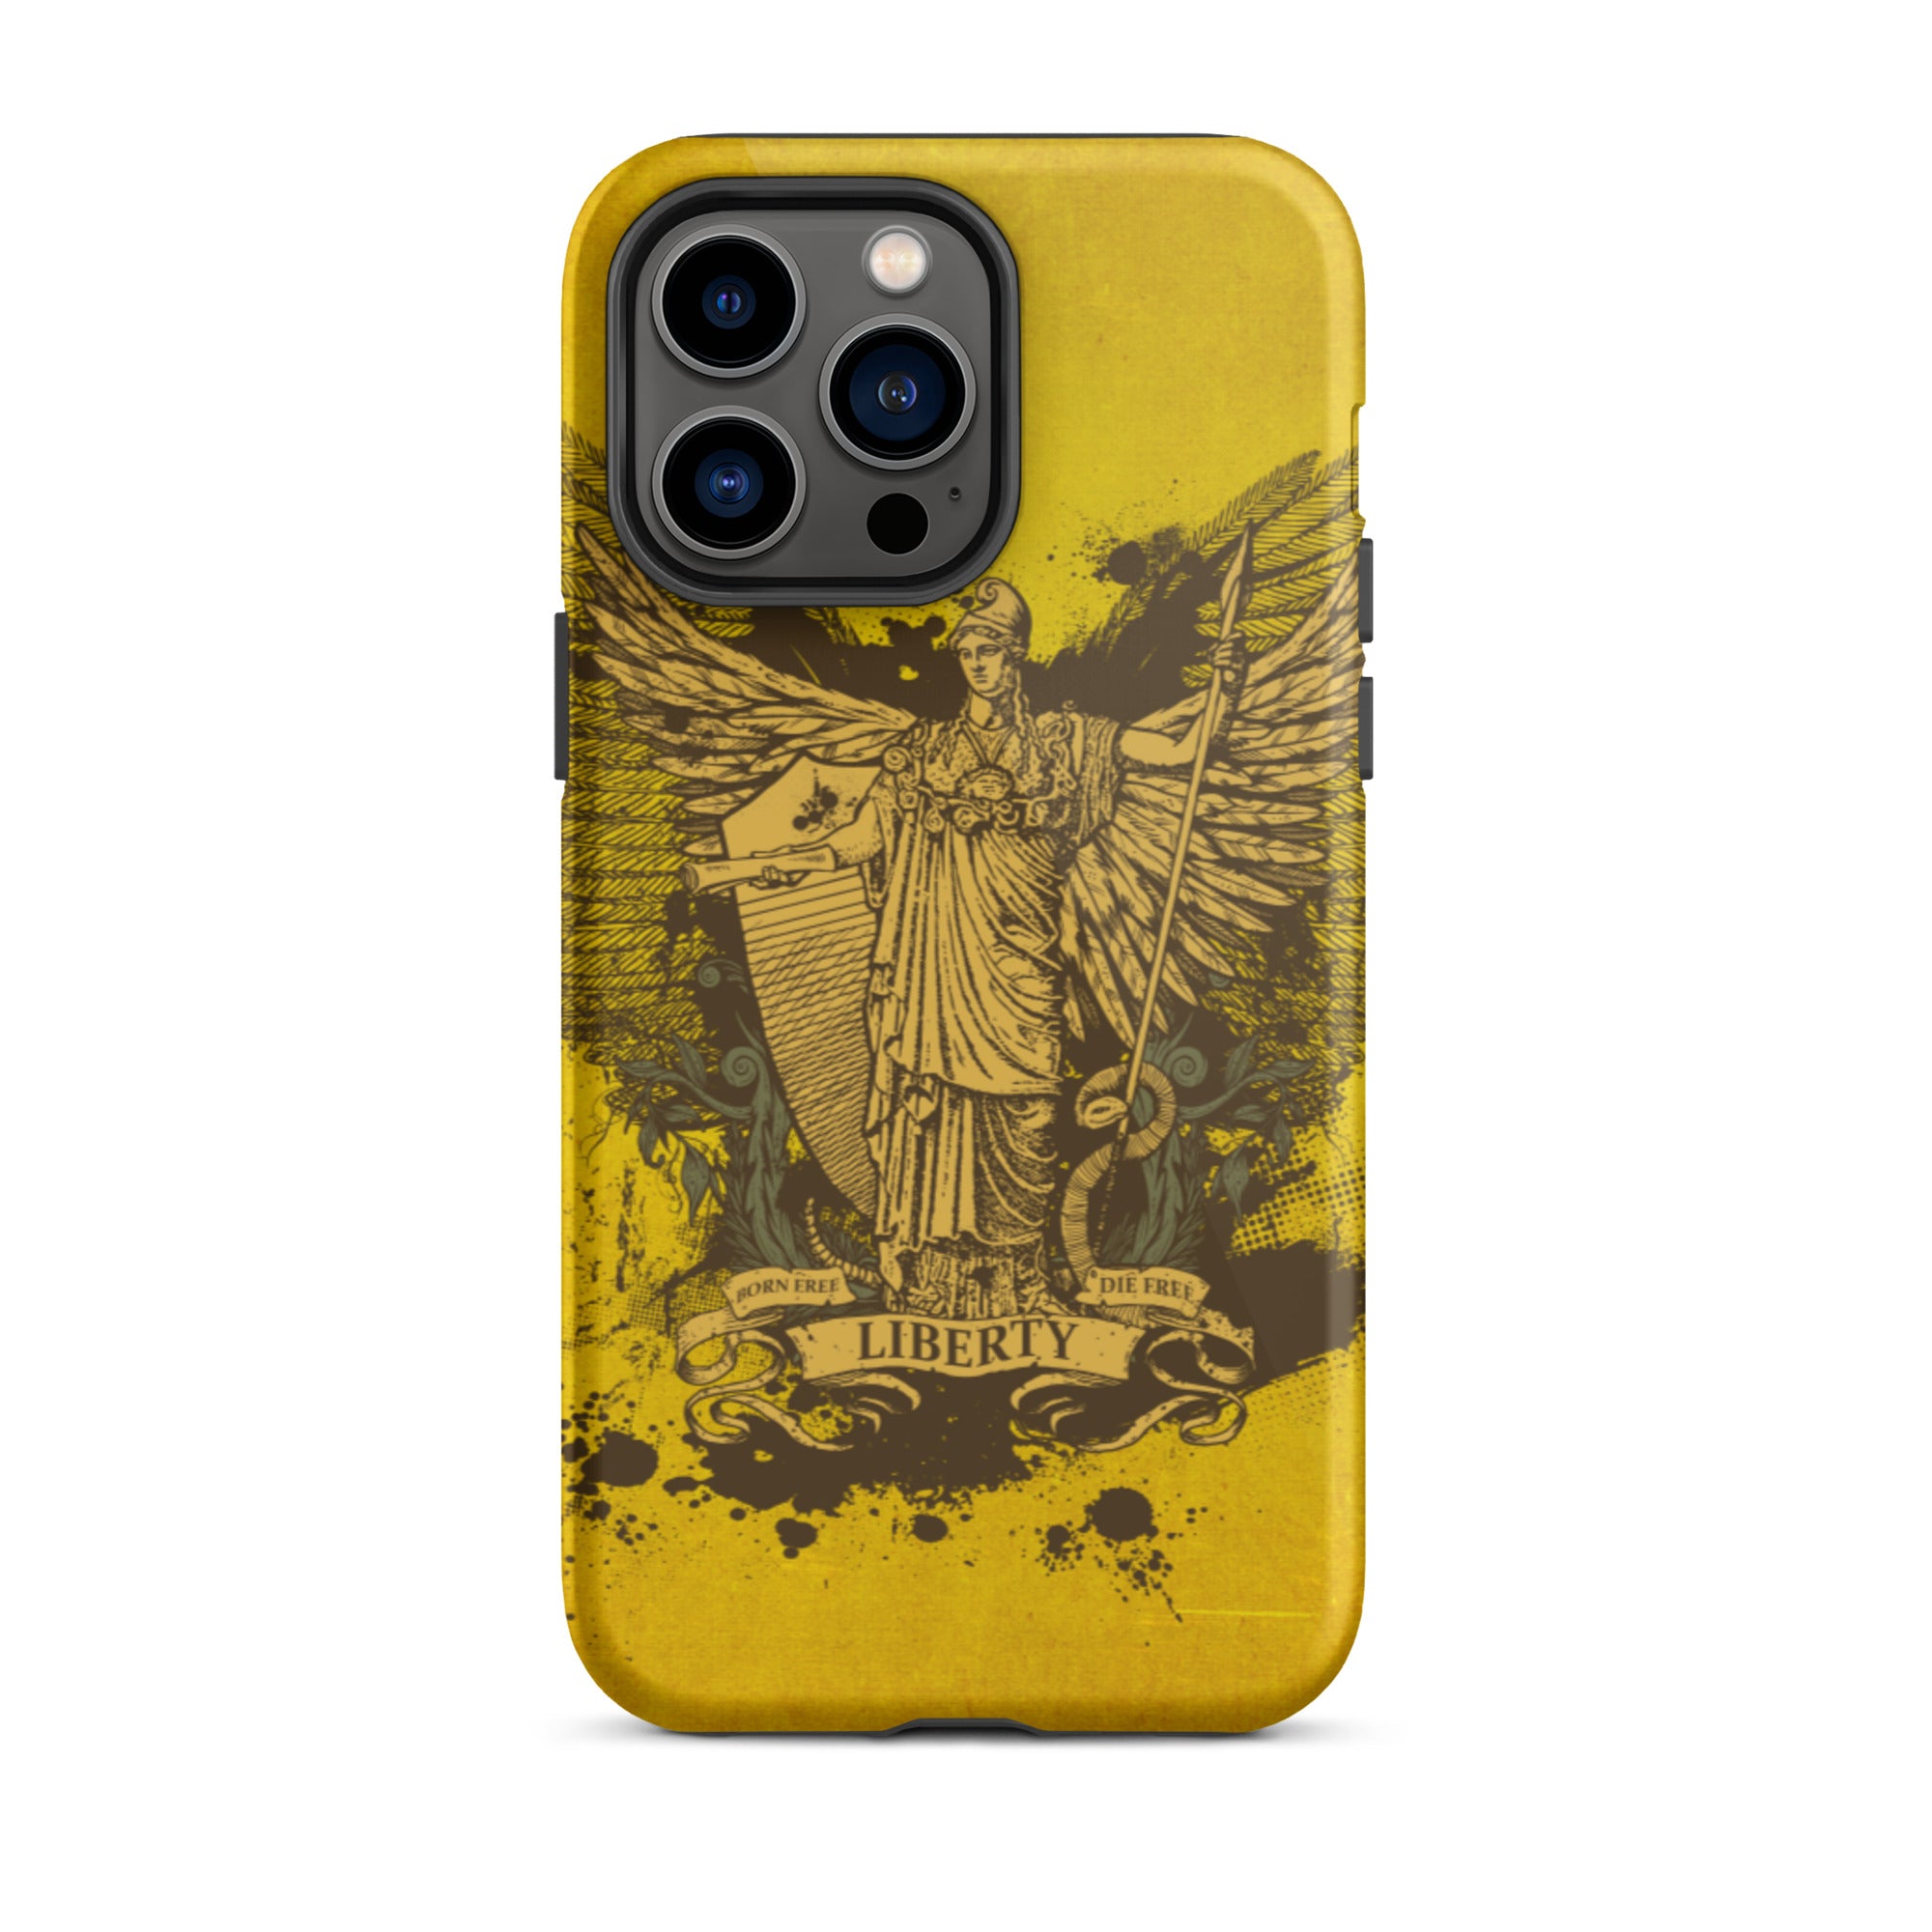 iPhone Cases by Liberty Maniacs